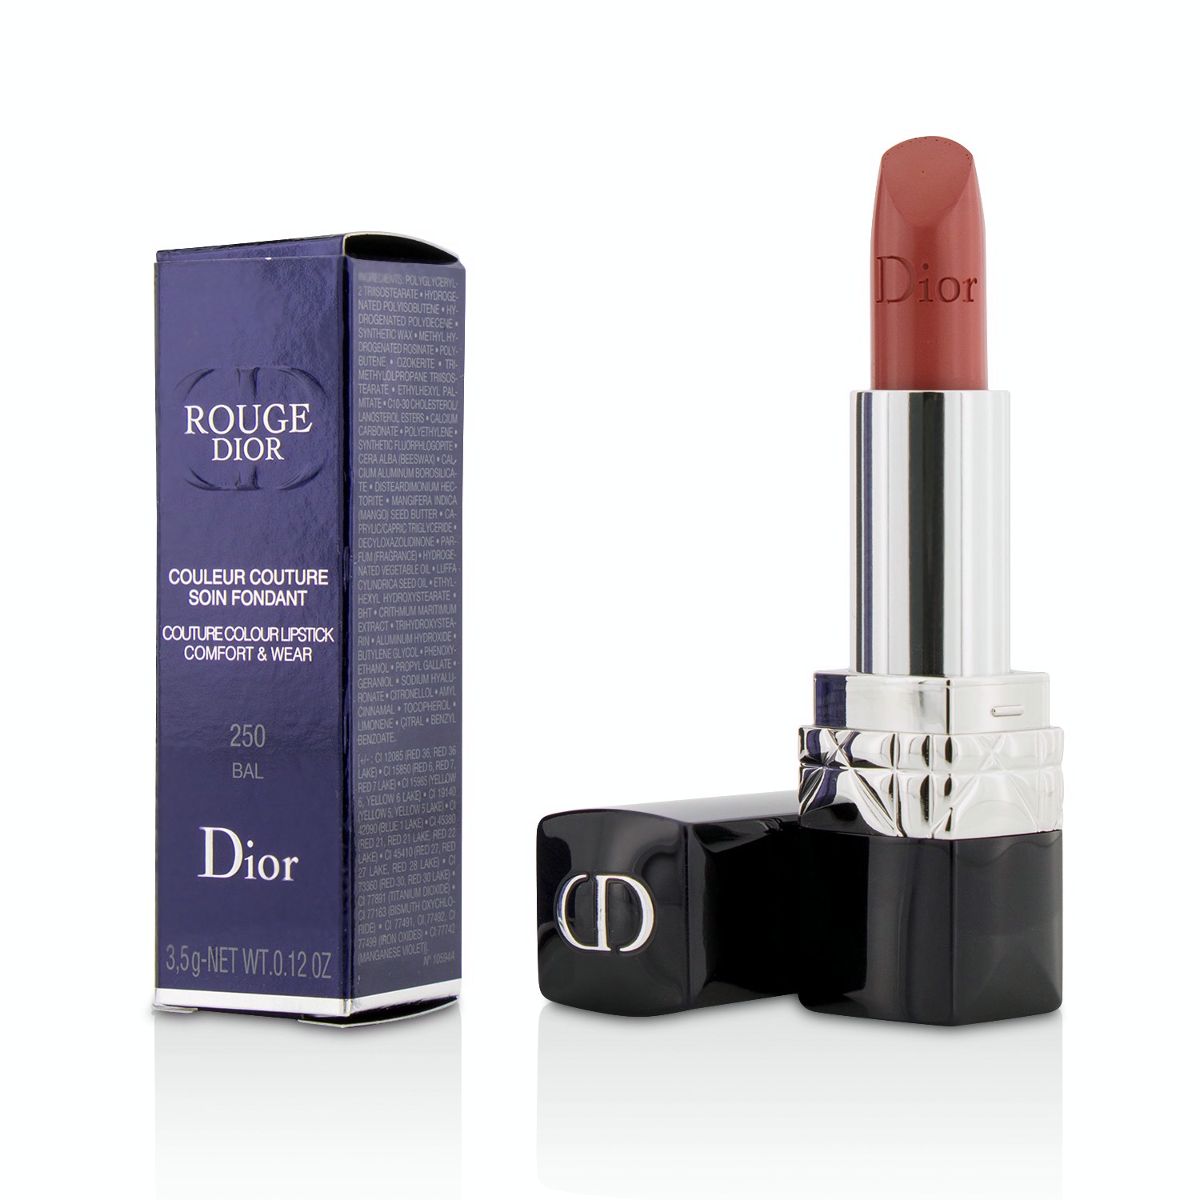 Rouge Dior Couture Colour Comfort  Wear Lipstick - # 250 Bal Christian Dior Image